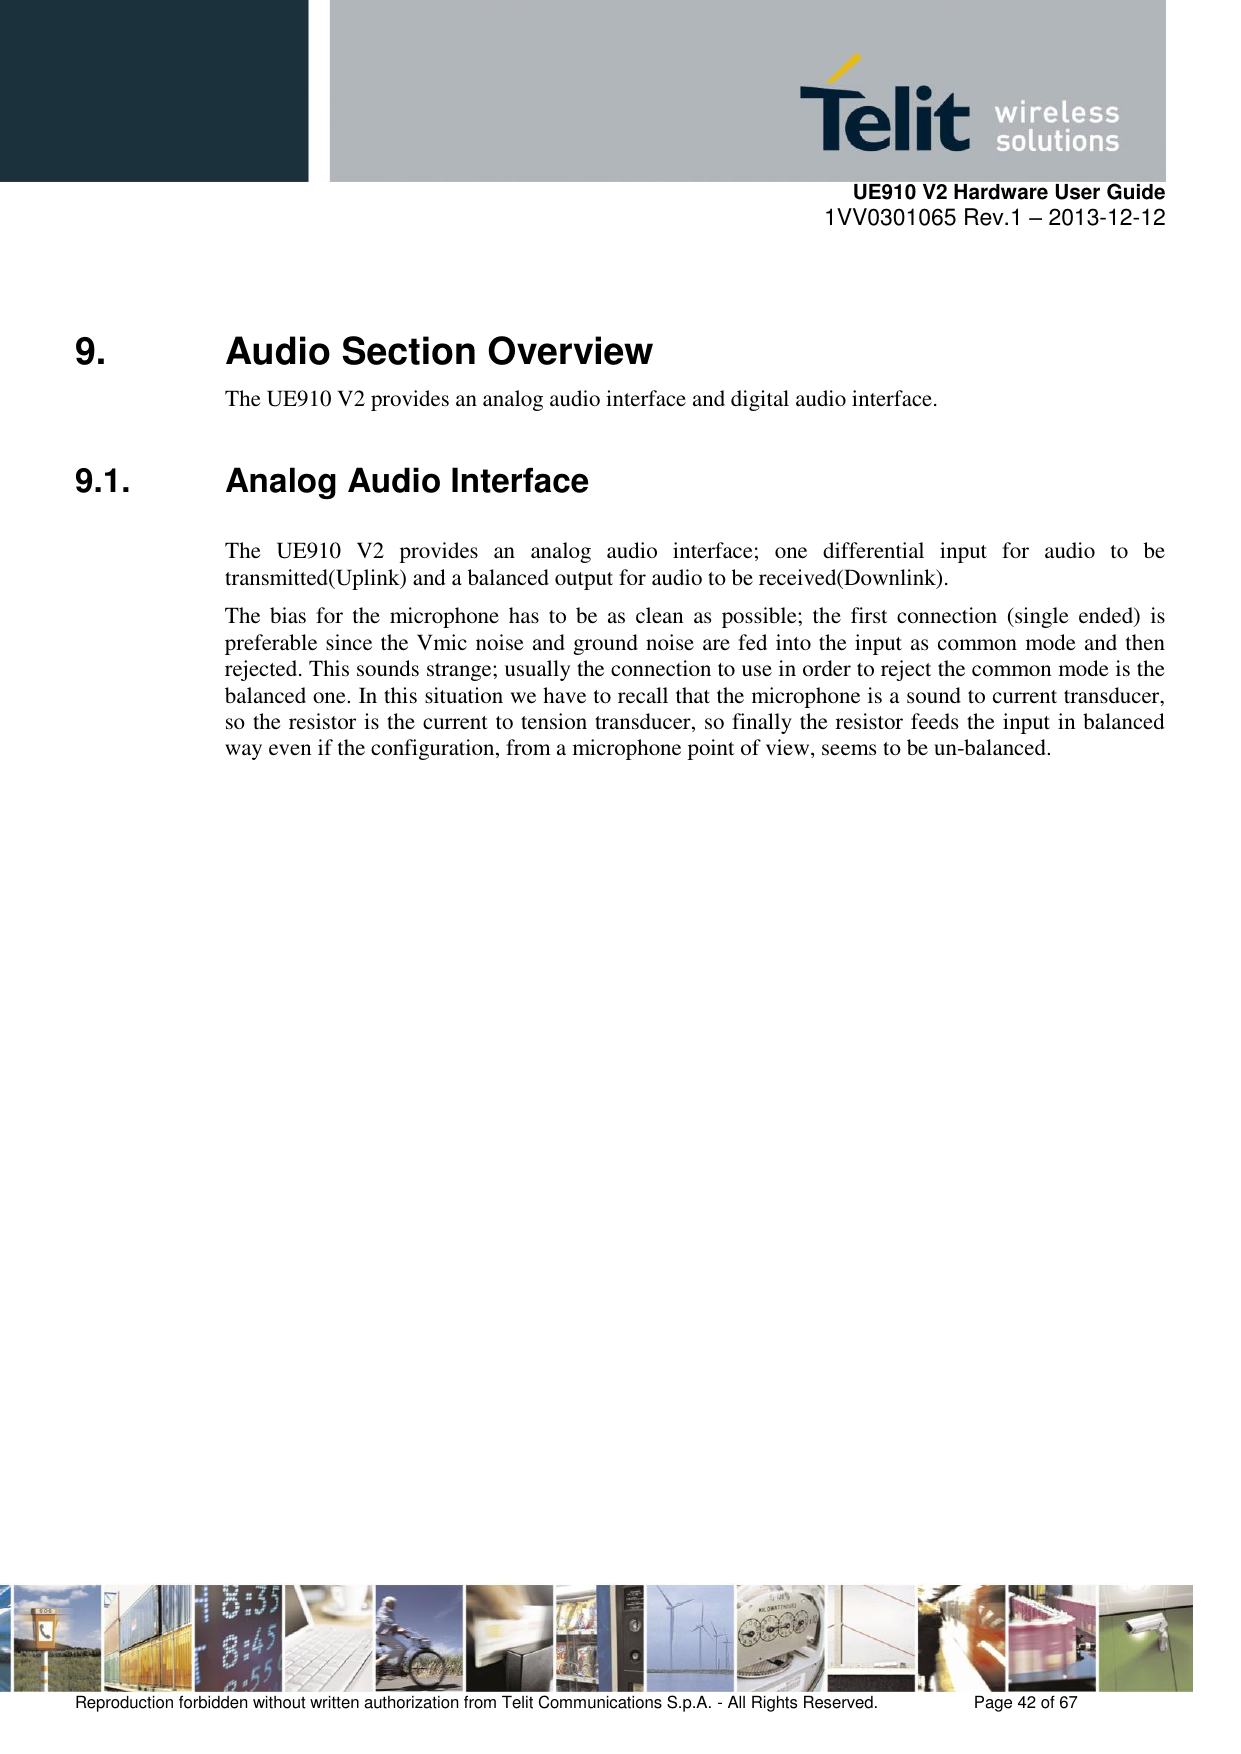     UE910 V2 Hardware User Guide 1VV0301065 Rev.1 – 2013-12-12  Reproduction forbidden without written authorization from Telit Communications S.p.A. - All Rights Reserved.    Page 42 of 67                                                     9.  Audio Section Overview  The UE910 V2 provides an analog audio interface and digital audio interface. 9.1.  Analog Audio Interface The  UE910  V2  provides  an  analog  audio  interface;  one  differential  input  for  audio  to  be transmitted(Uplink) and a balanced output for audio to be received(Downlink). The  bias for  the  microphone  has  to  be  as  clean  as  possible; the  first  connection  (single  ended) is preferable since the Vmic noise and ground noise are fed into the input as common mode and then rejected. This sounds strange; usually the connection to use in order to reject the common mode is the balanced one. In this situation we have to recall that the microphone is a sound to current transducer, so the resistor is the current to tension transducer, so finally the resistor feeds the input in balanced way even if the configuration, from a microphone point of view, seems to be un-balanced.                   